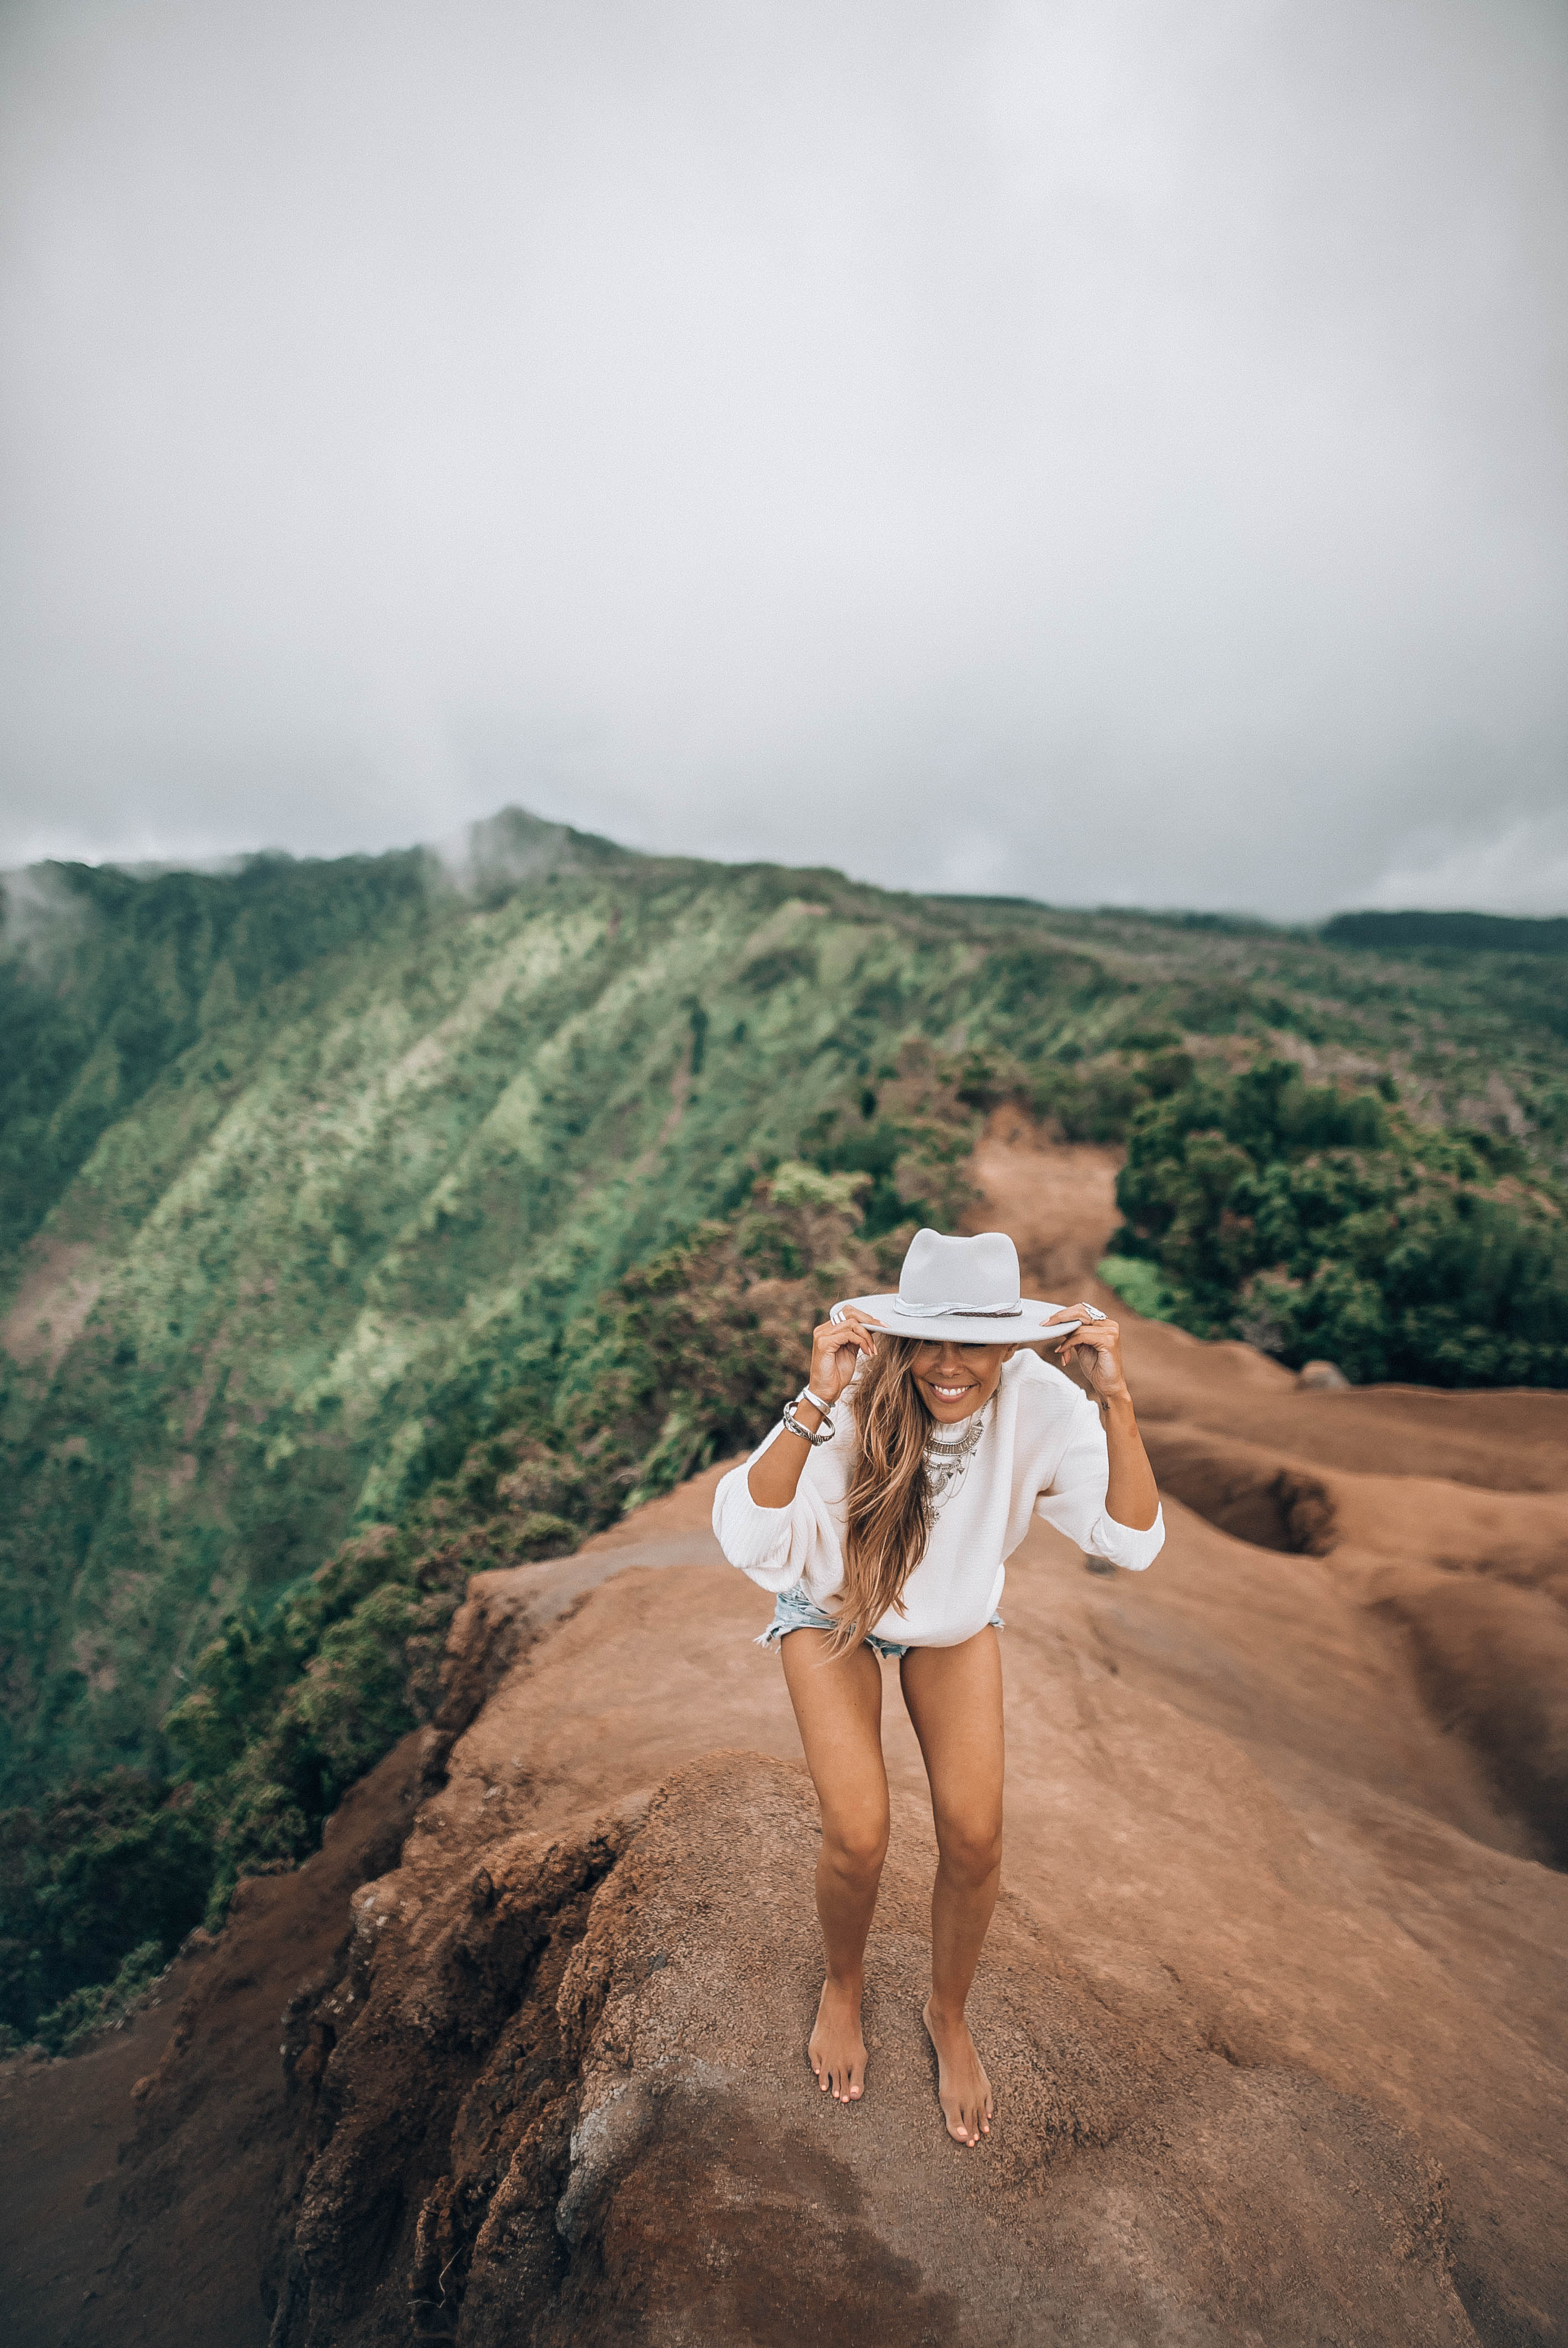 Why You Should be Planning a Trip to Kauai As Soon As You can.